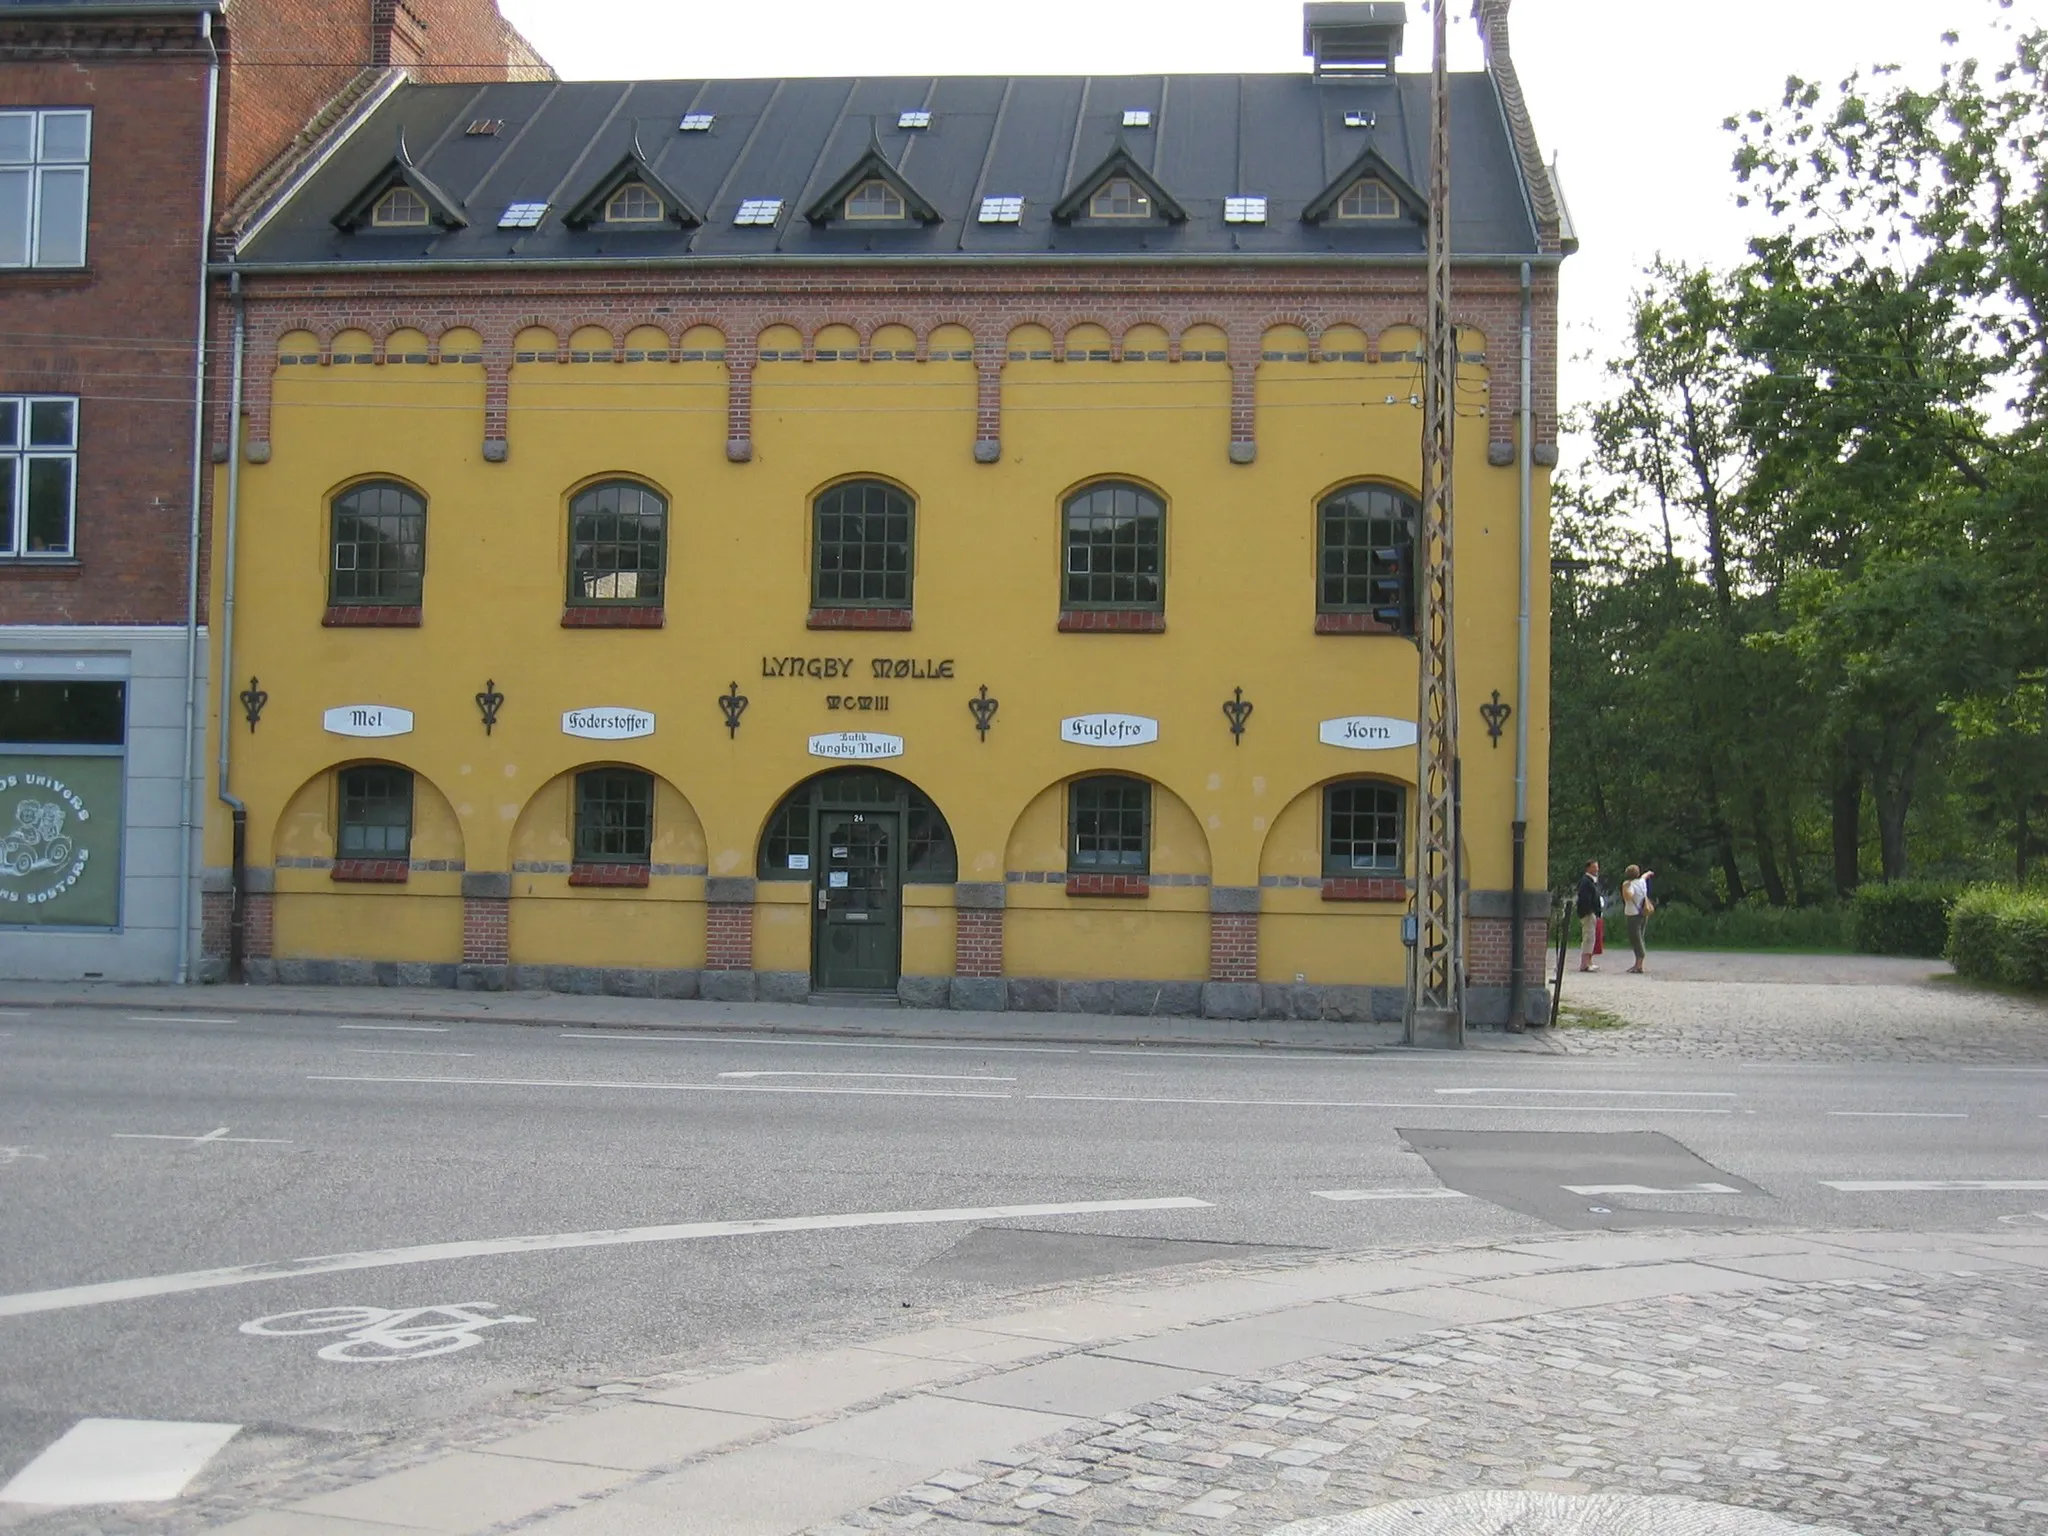 Photo showing: Lyngby south mill, Royal Lyngby, Denmark.